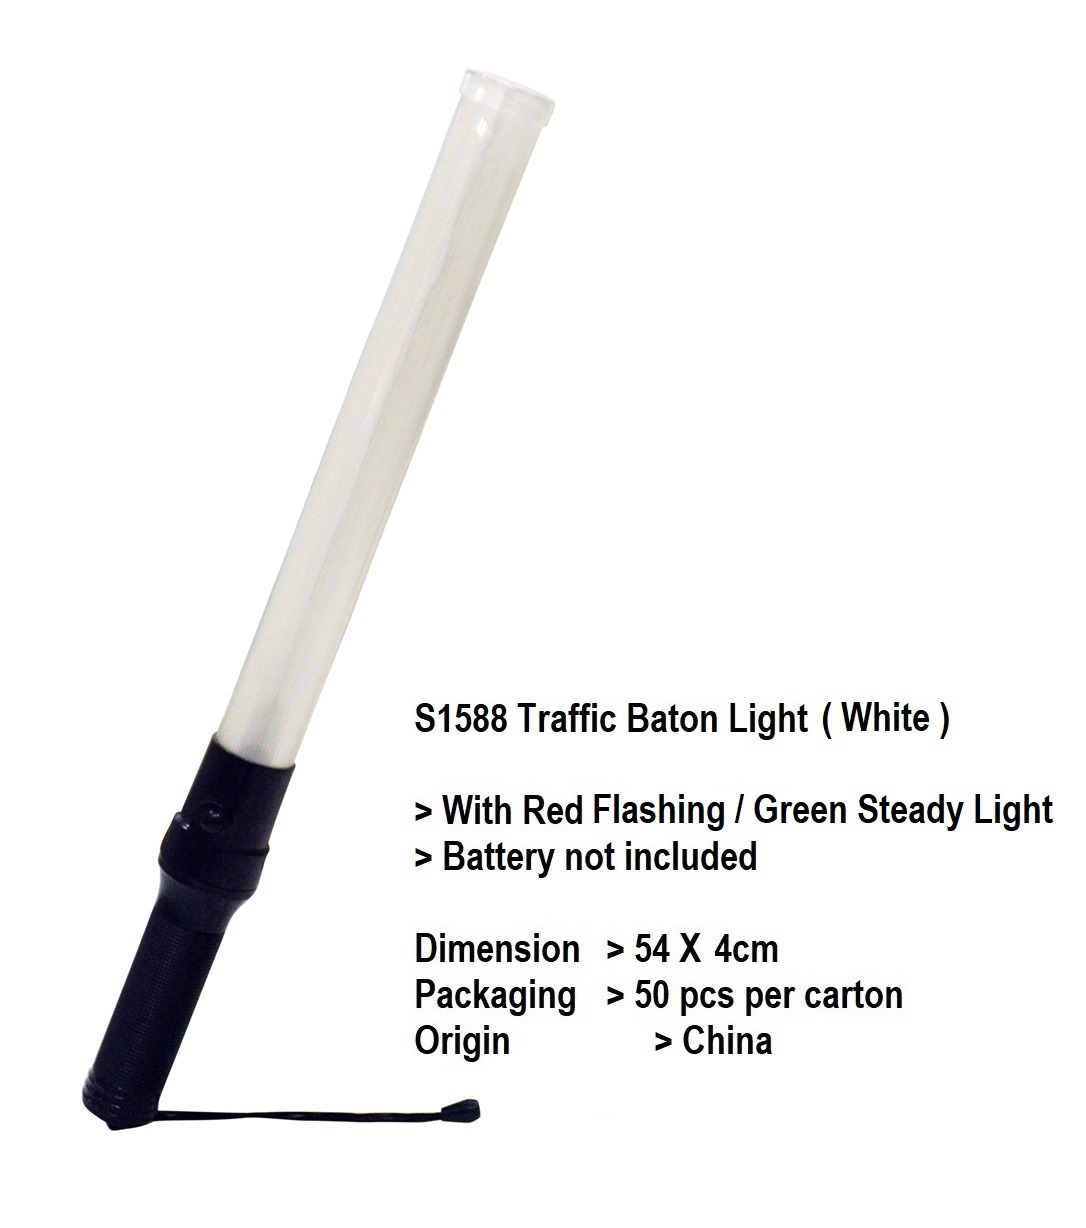 BATON LIGHT WHITE WITH RED FLASHING AND GREEN STEADY LIGHT